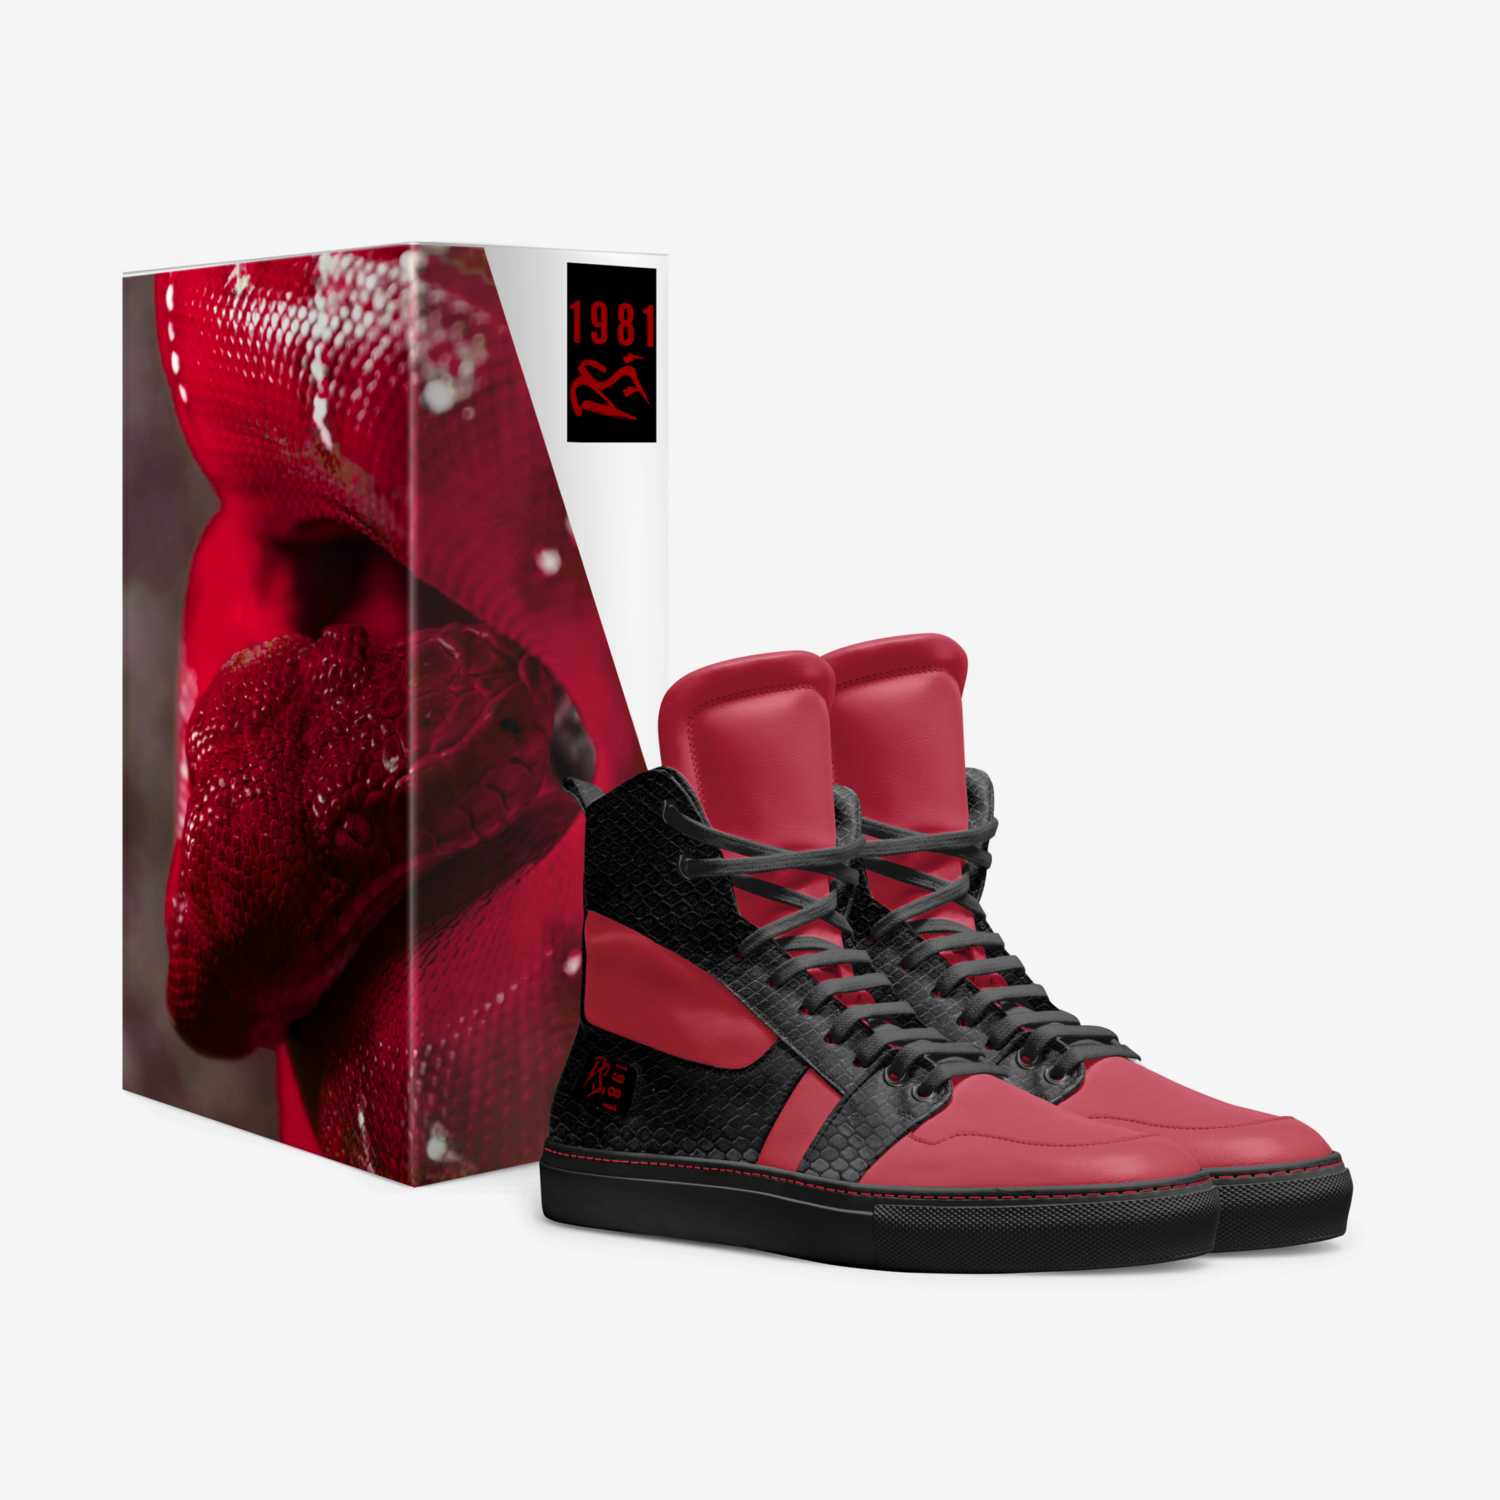 Redd Venom custom made in Italy shoes by Timothy M Holt Jr | Box view